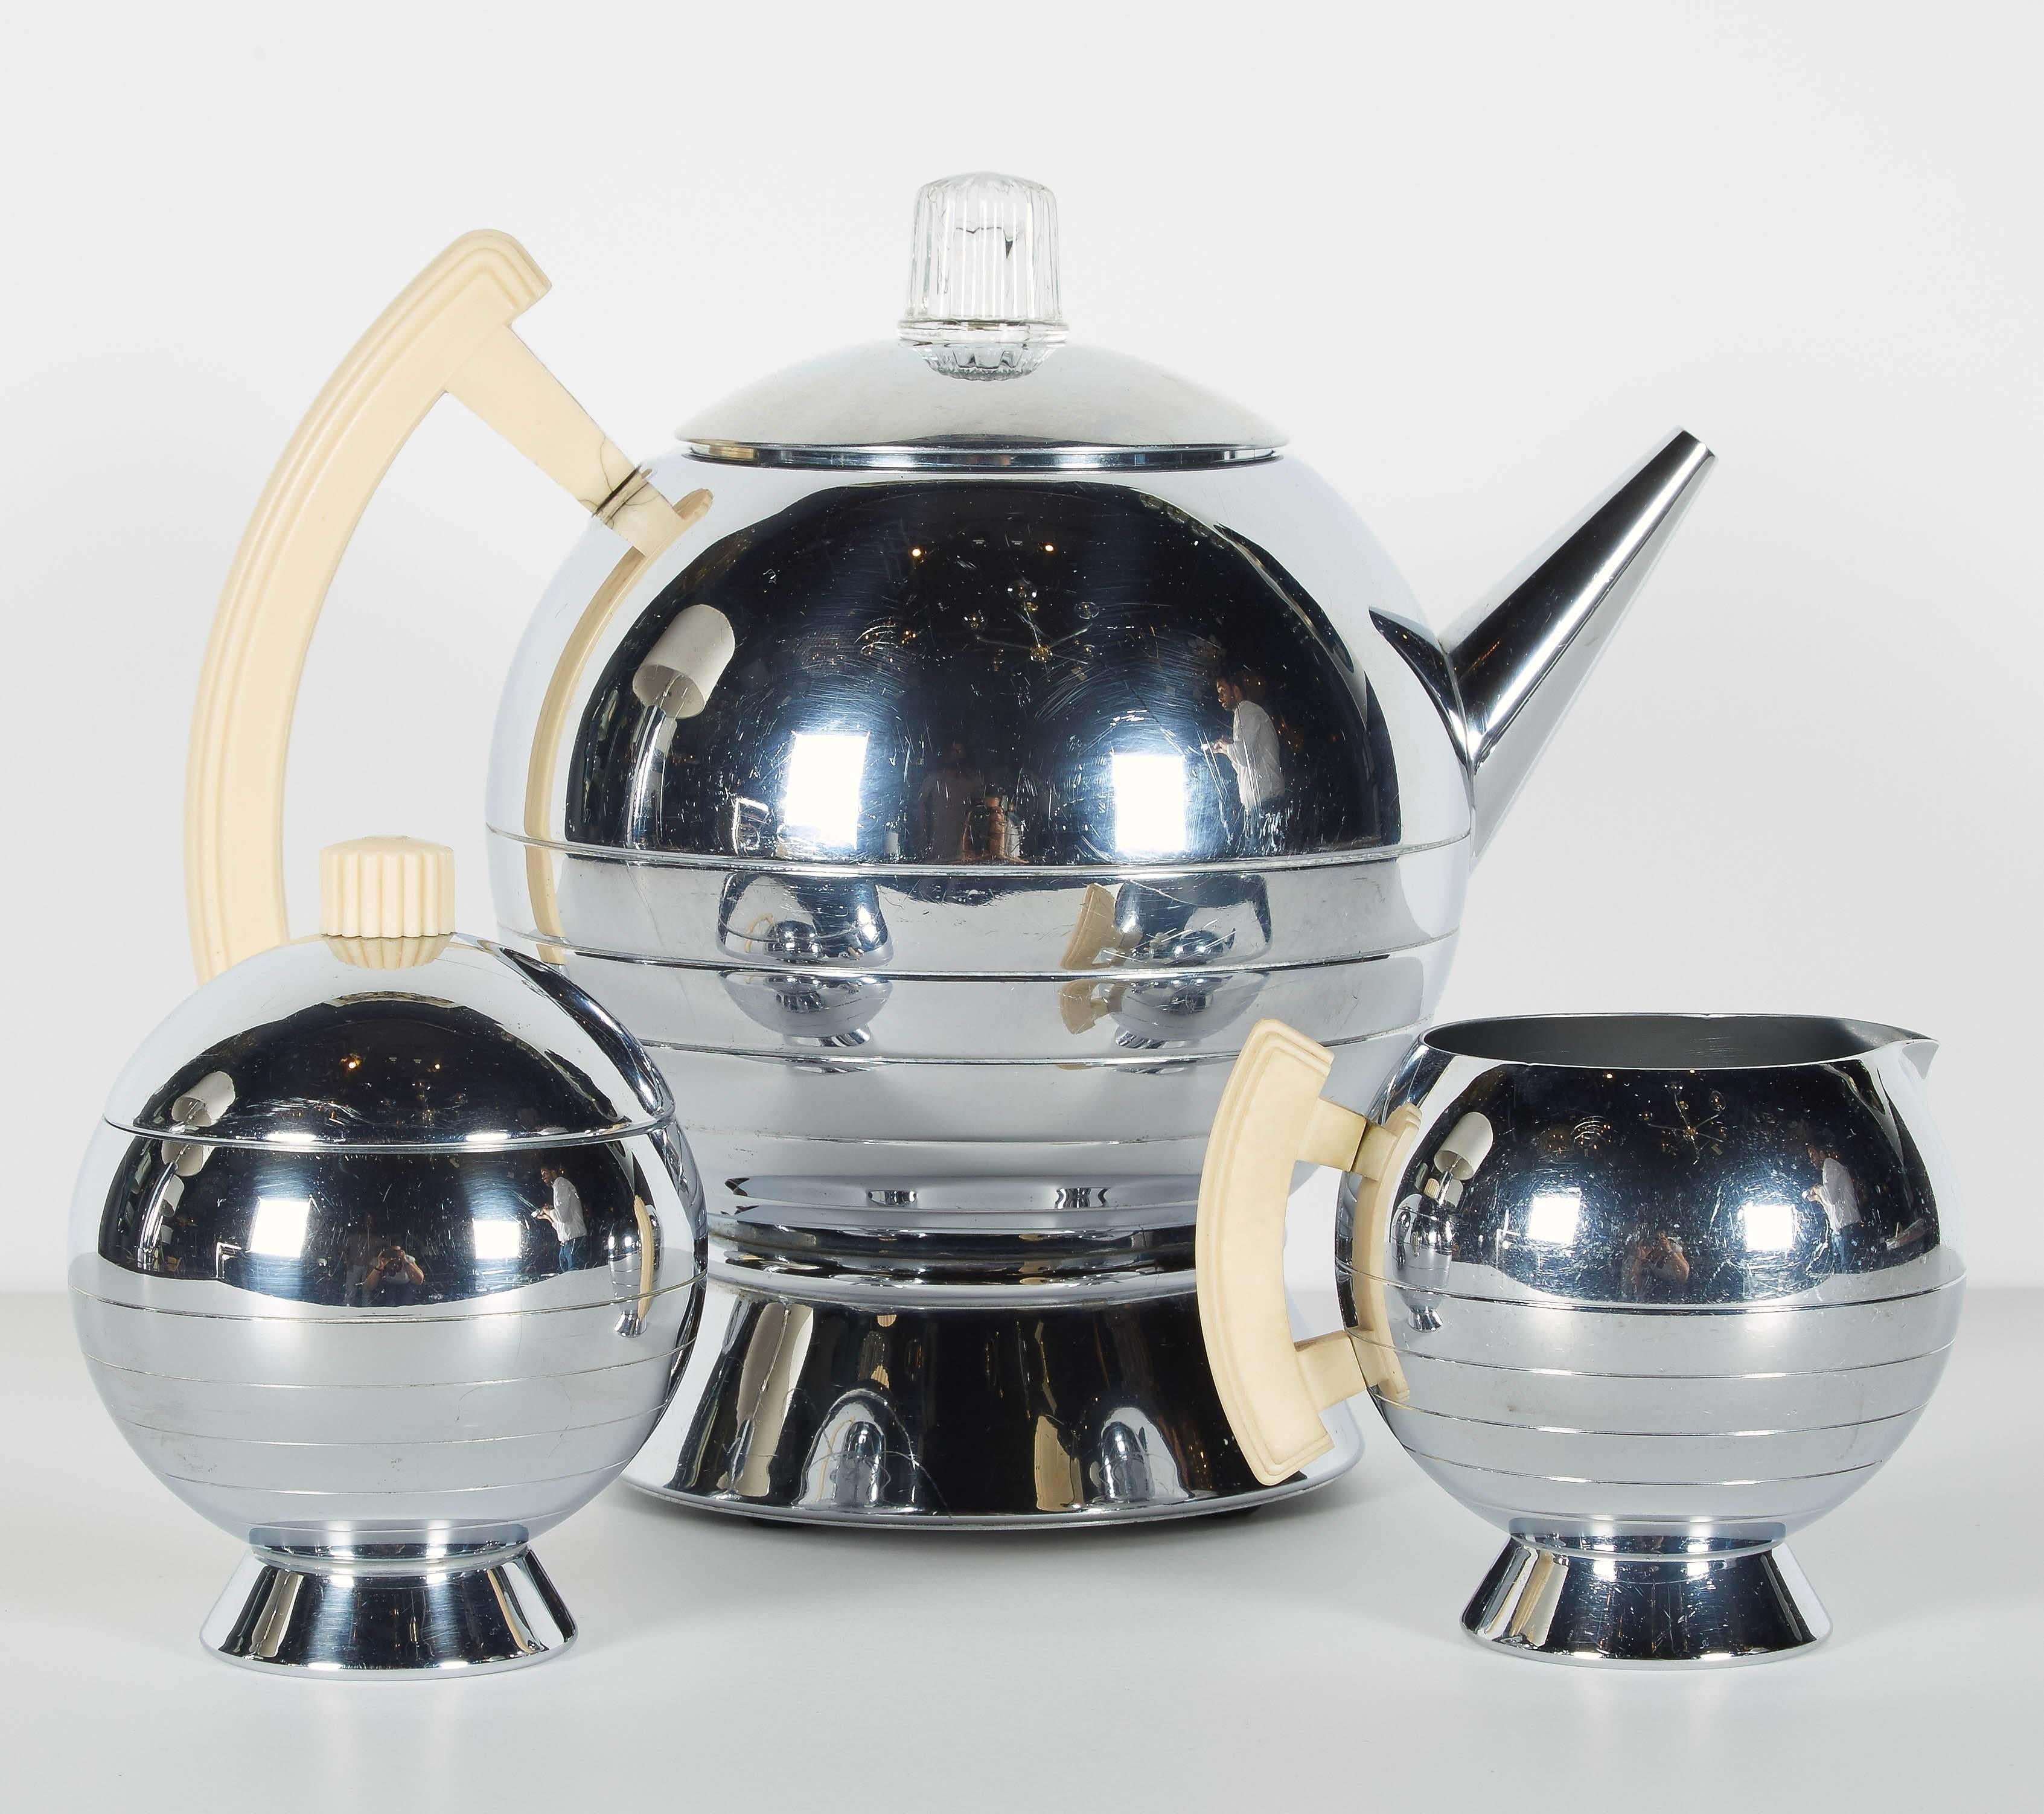 Iconic Art Deco coffee and tea service set with stylized Machine Age design. All pieces have chrome finish with bakelite handles and accents in ivory and cognac. The serving set includes an electric coffee pot, sugar, creamer, serving tray, and